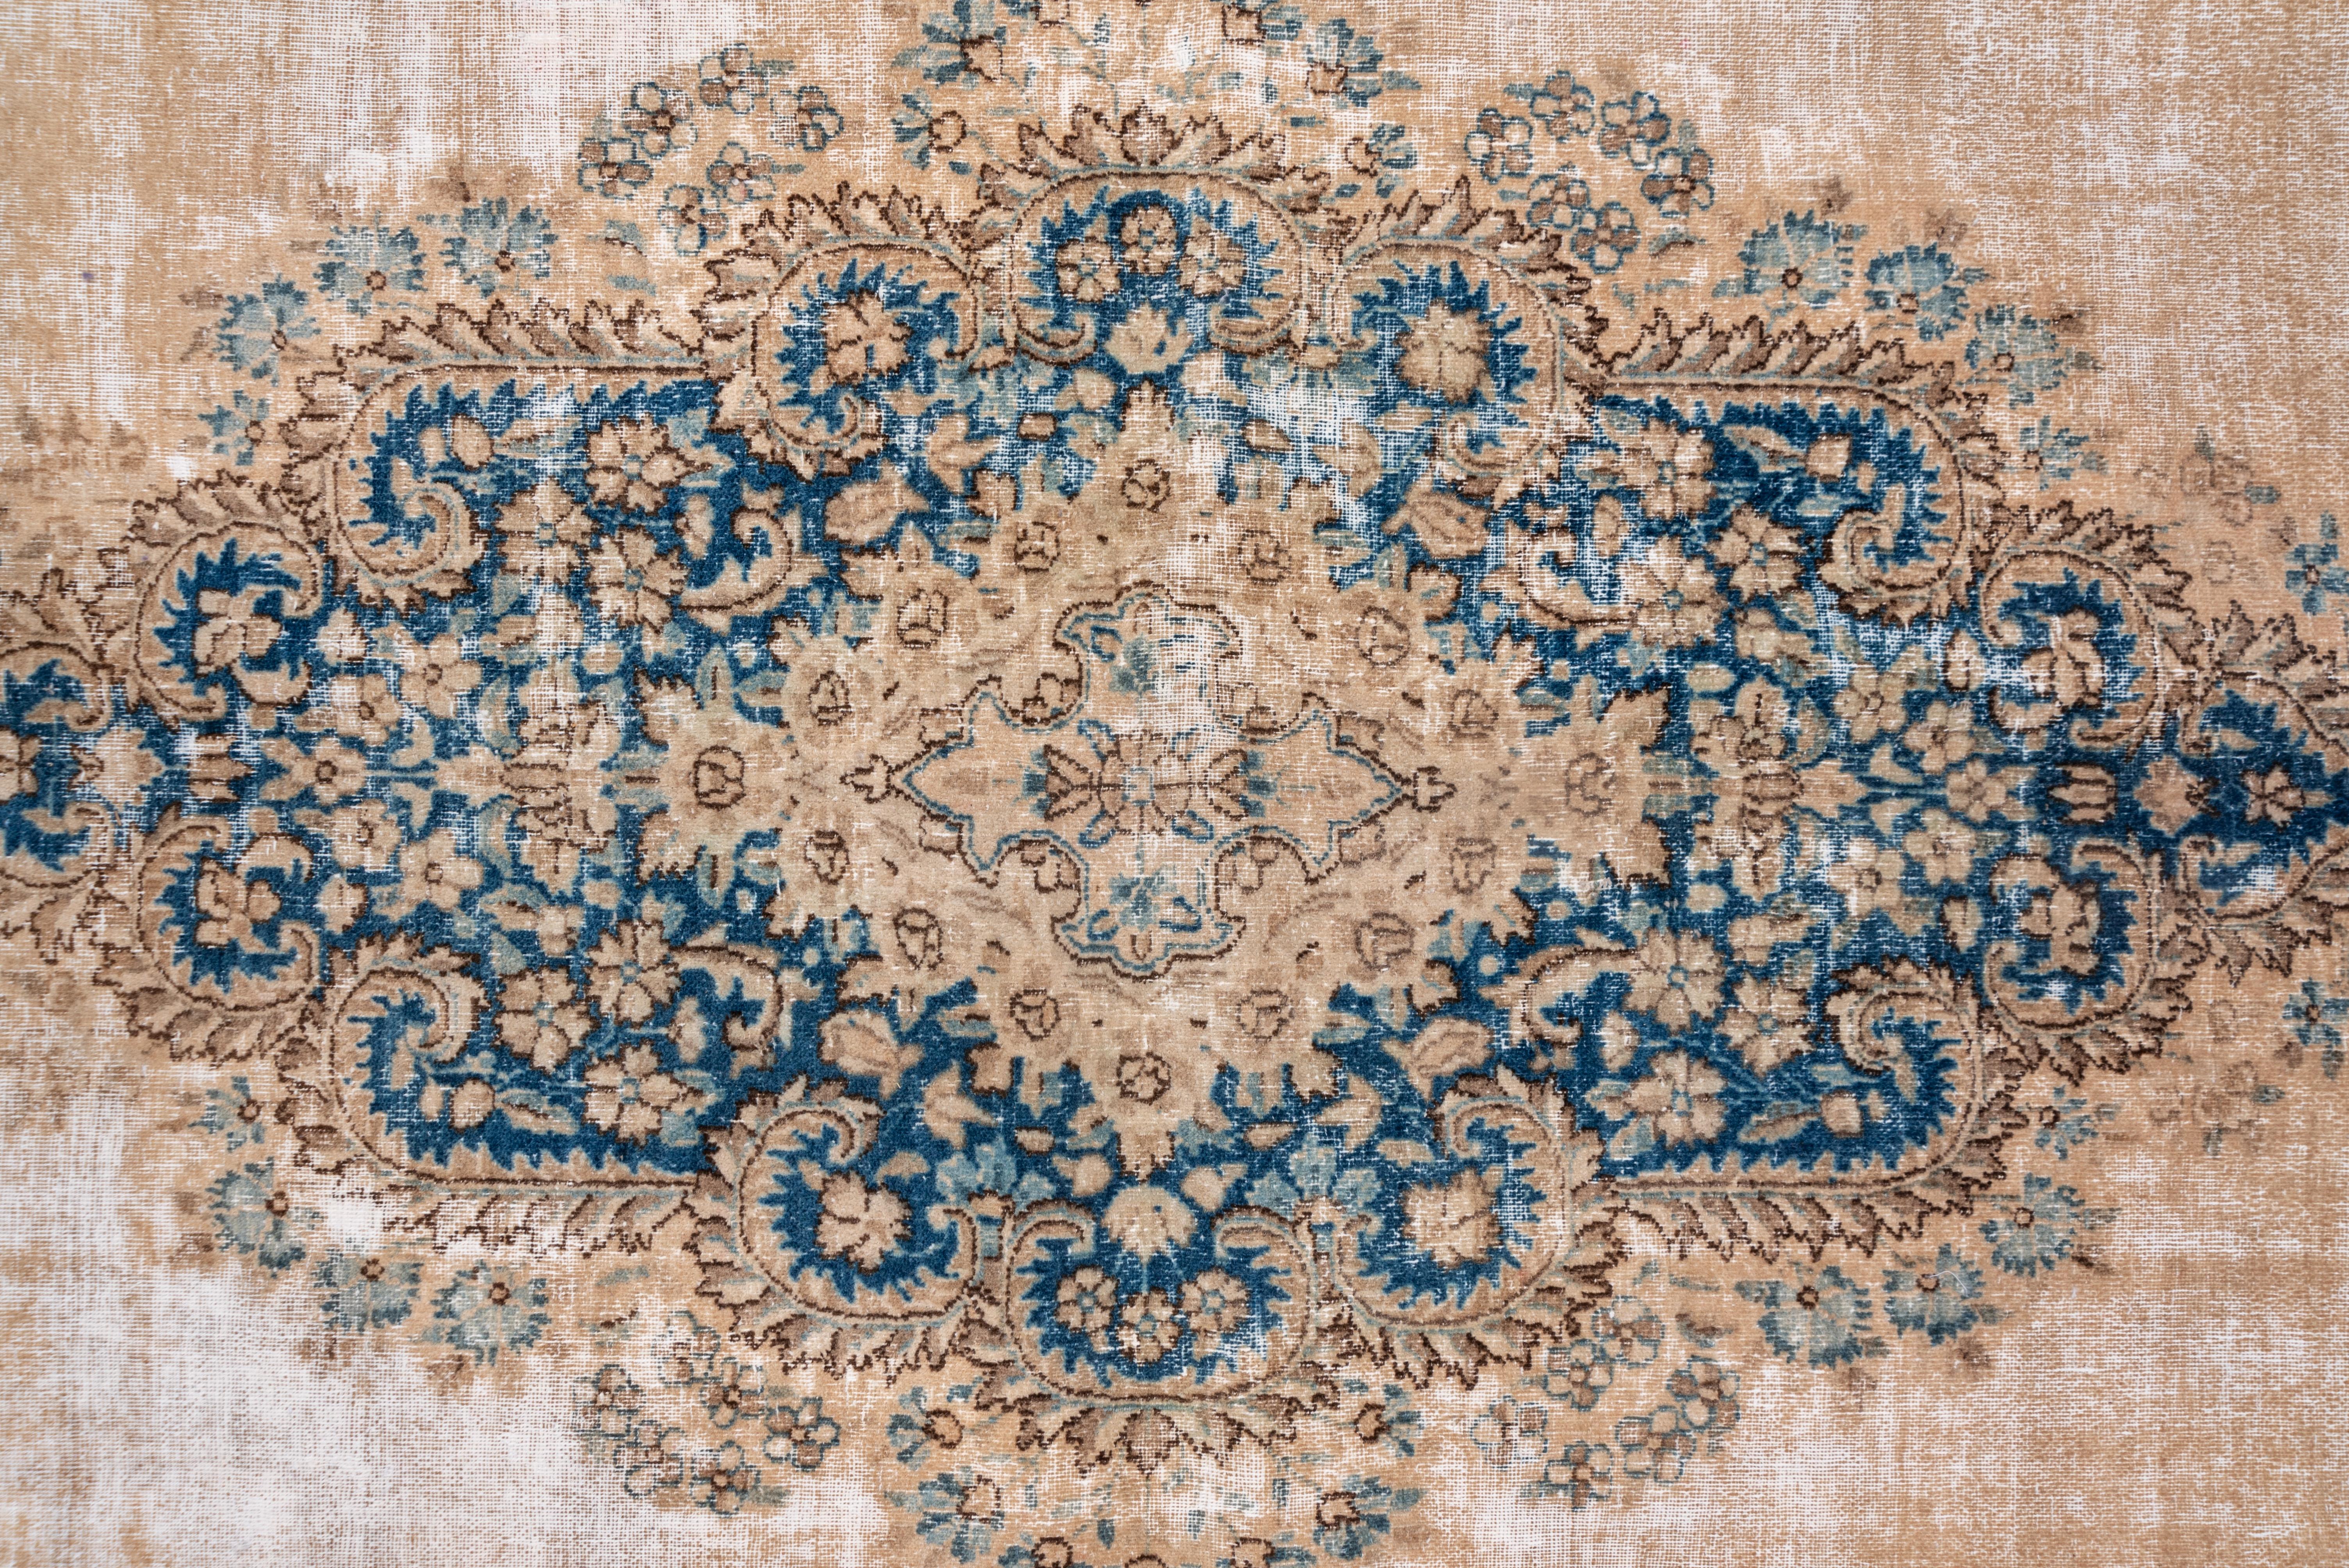 The creamy eggshell open field displays a lobed tall lozenge medallion with developed palmettes. The field is edged by a broad,filigree floral pattern, and the mid-blue broken border features complex palmettes. This SE Persian carpet was made for